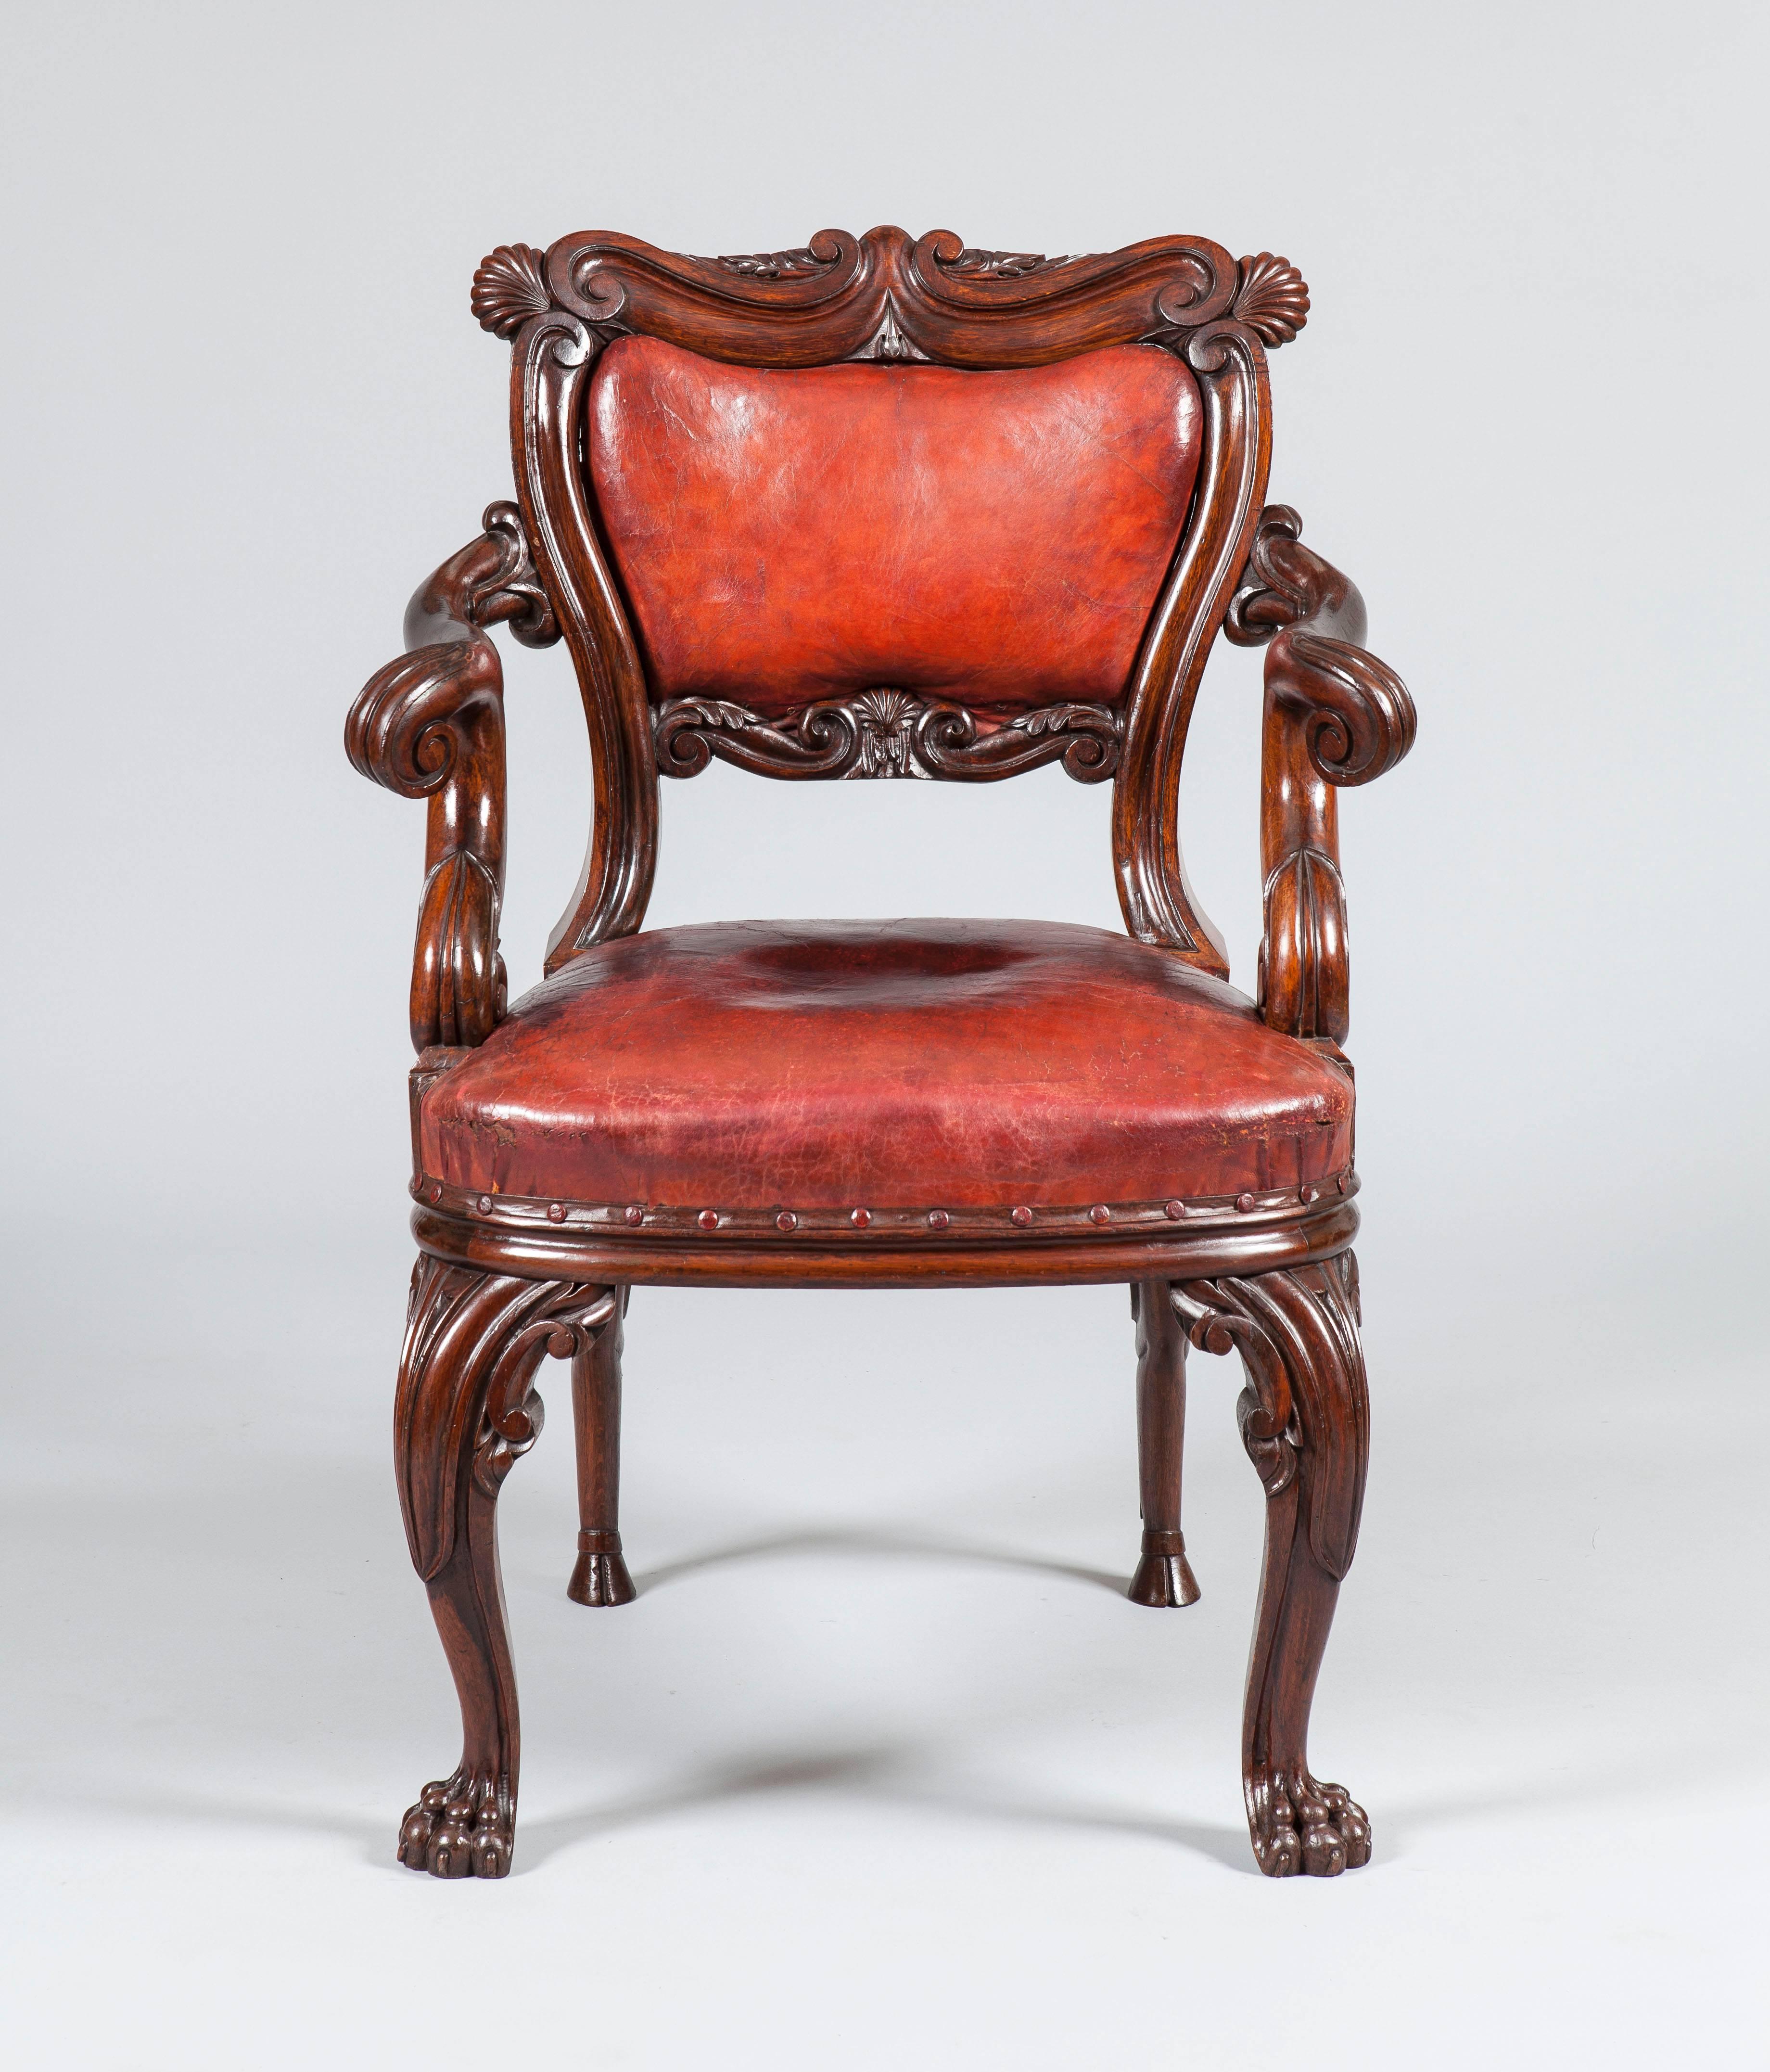 An Irish armchair in the manner of Williams and Gibton

Constructed in oak, rising from cabriole front legs channeled and carved with scrolls, terminating in claw feet, the rear legs of equine form, with hoof feet, the channeled seat back having a